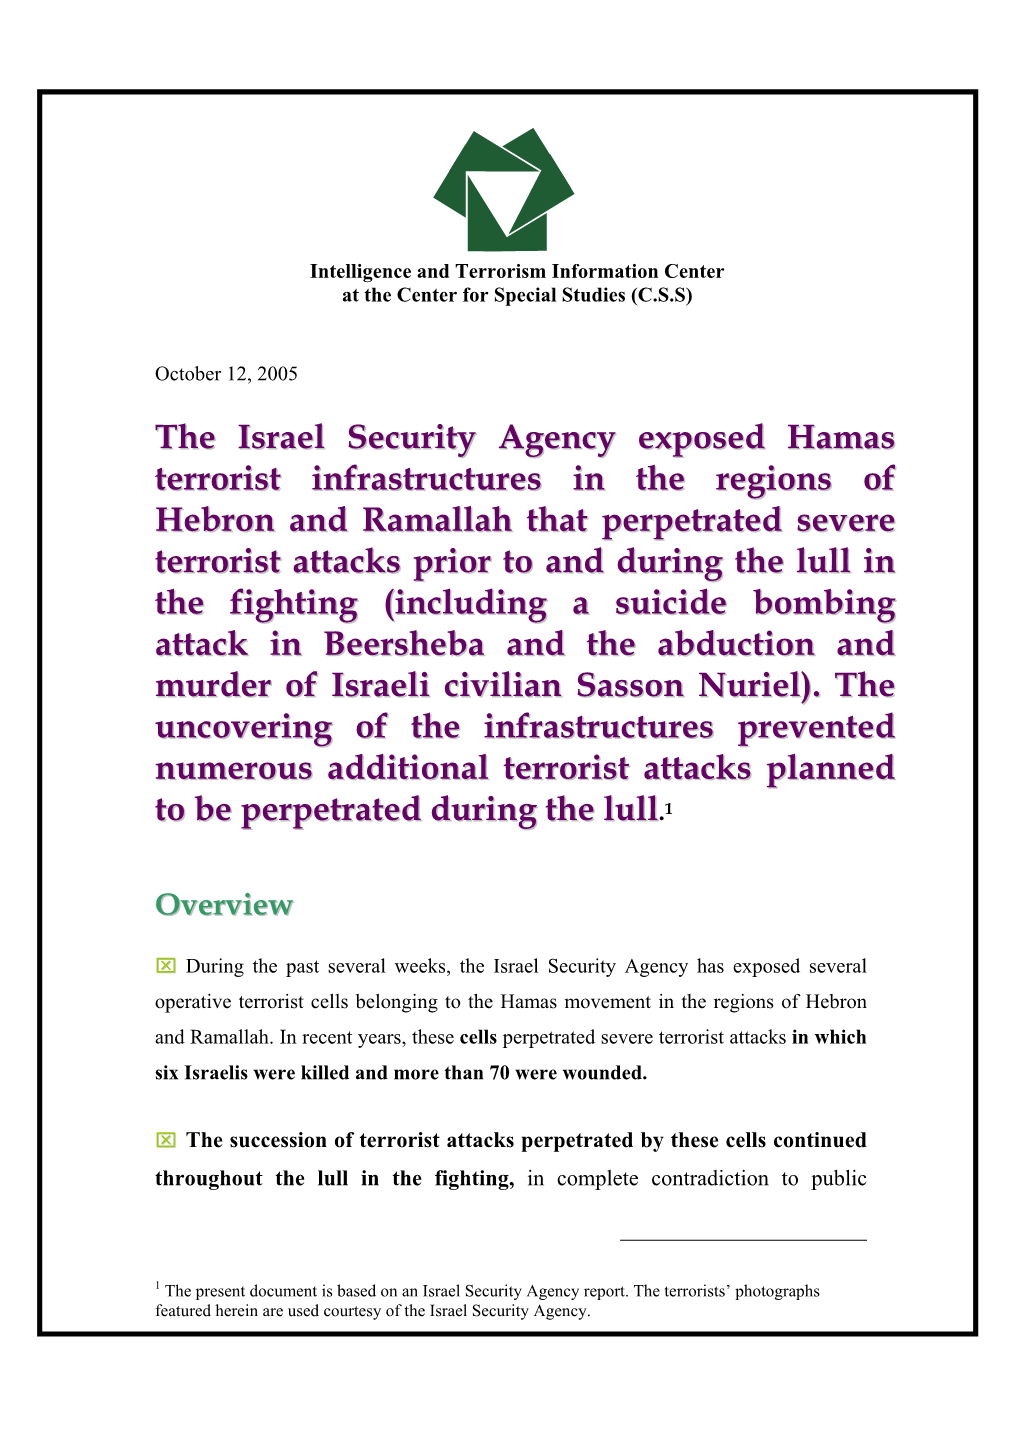 The Israel Security Agency Exposed Hamas Terrorist Infrastructures In